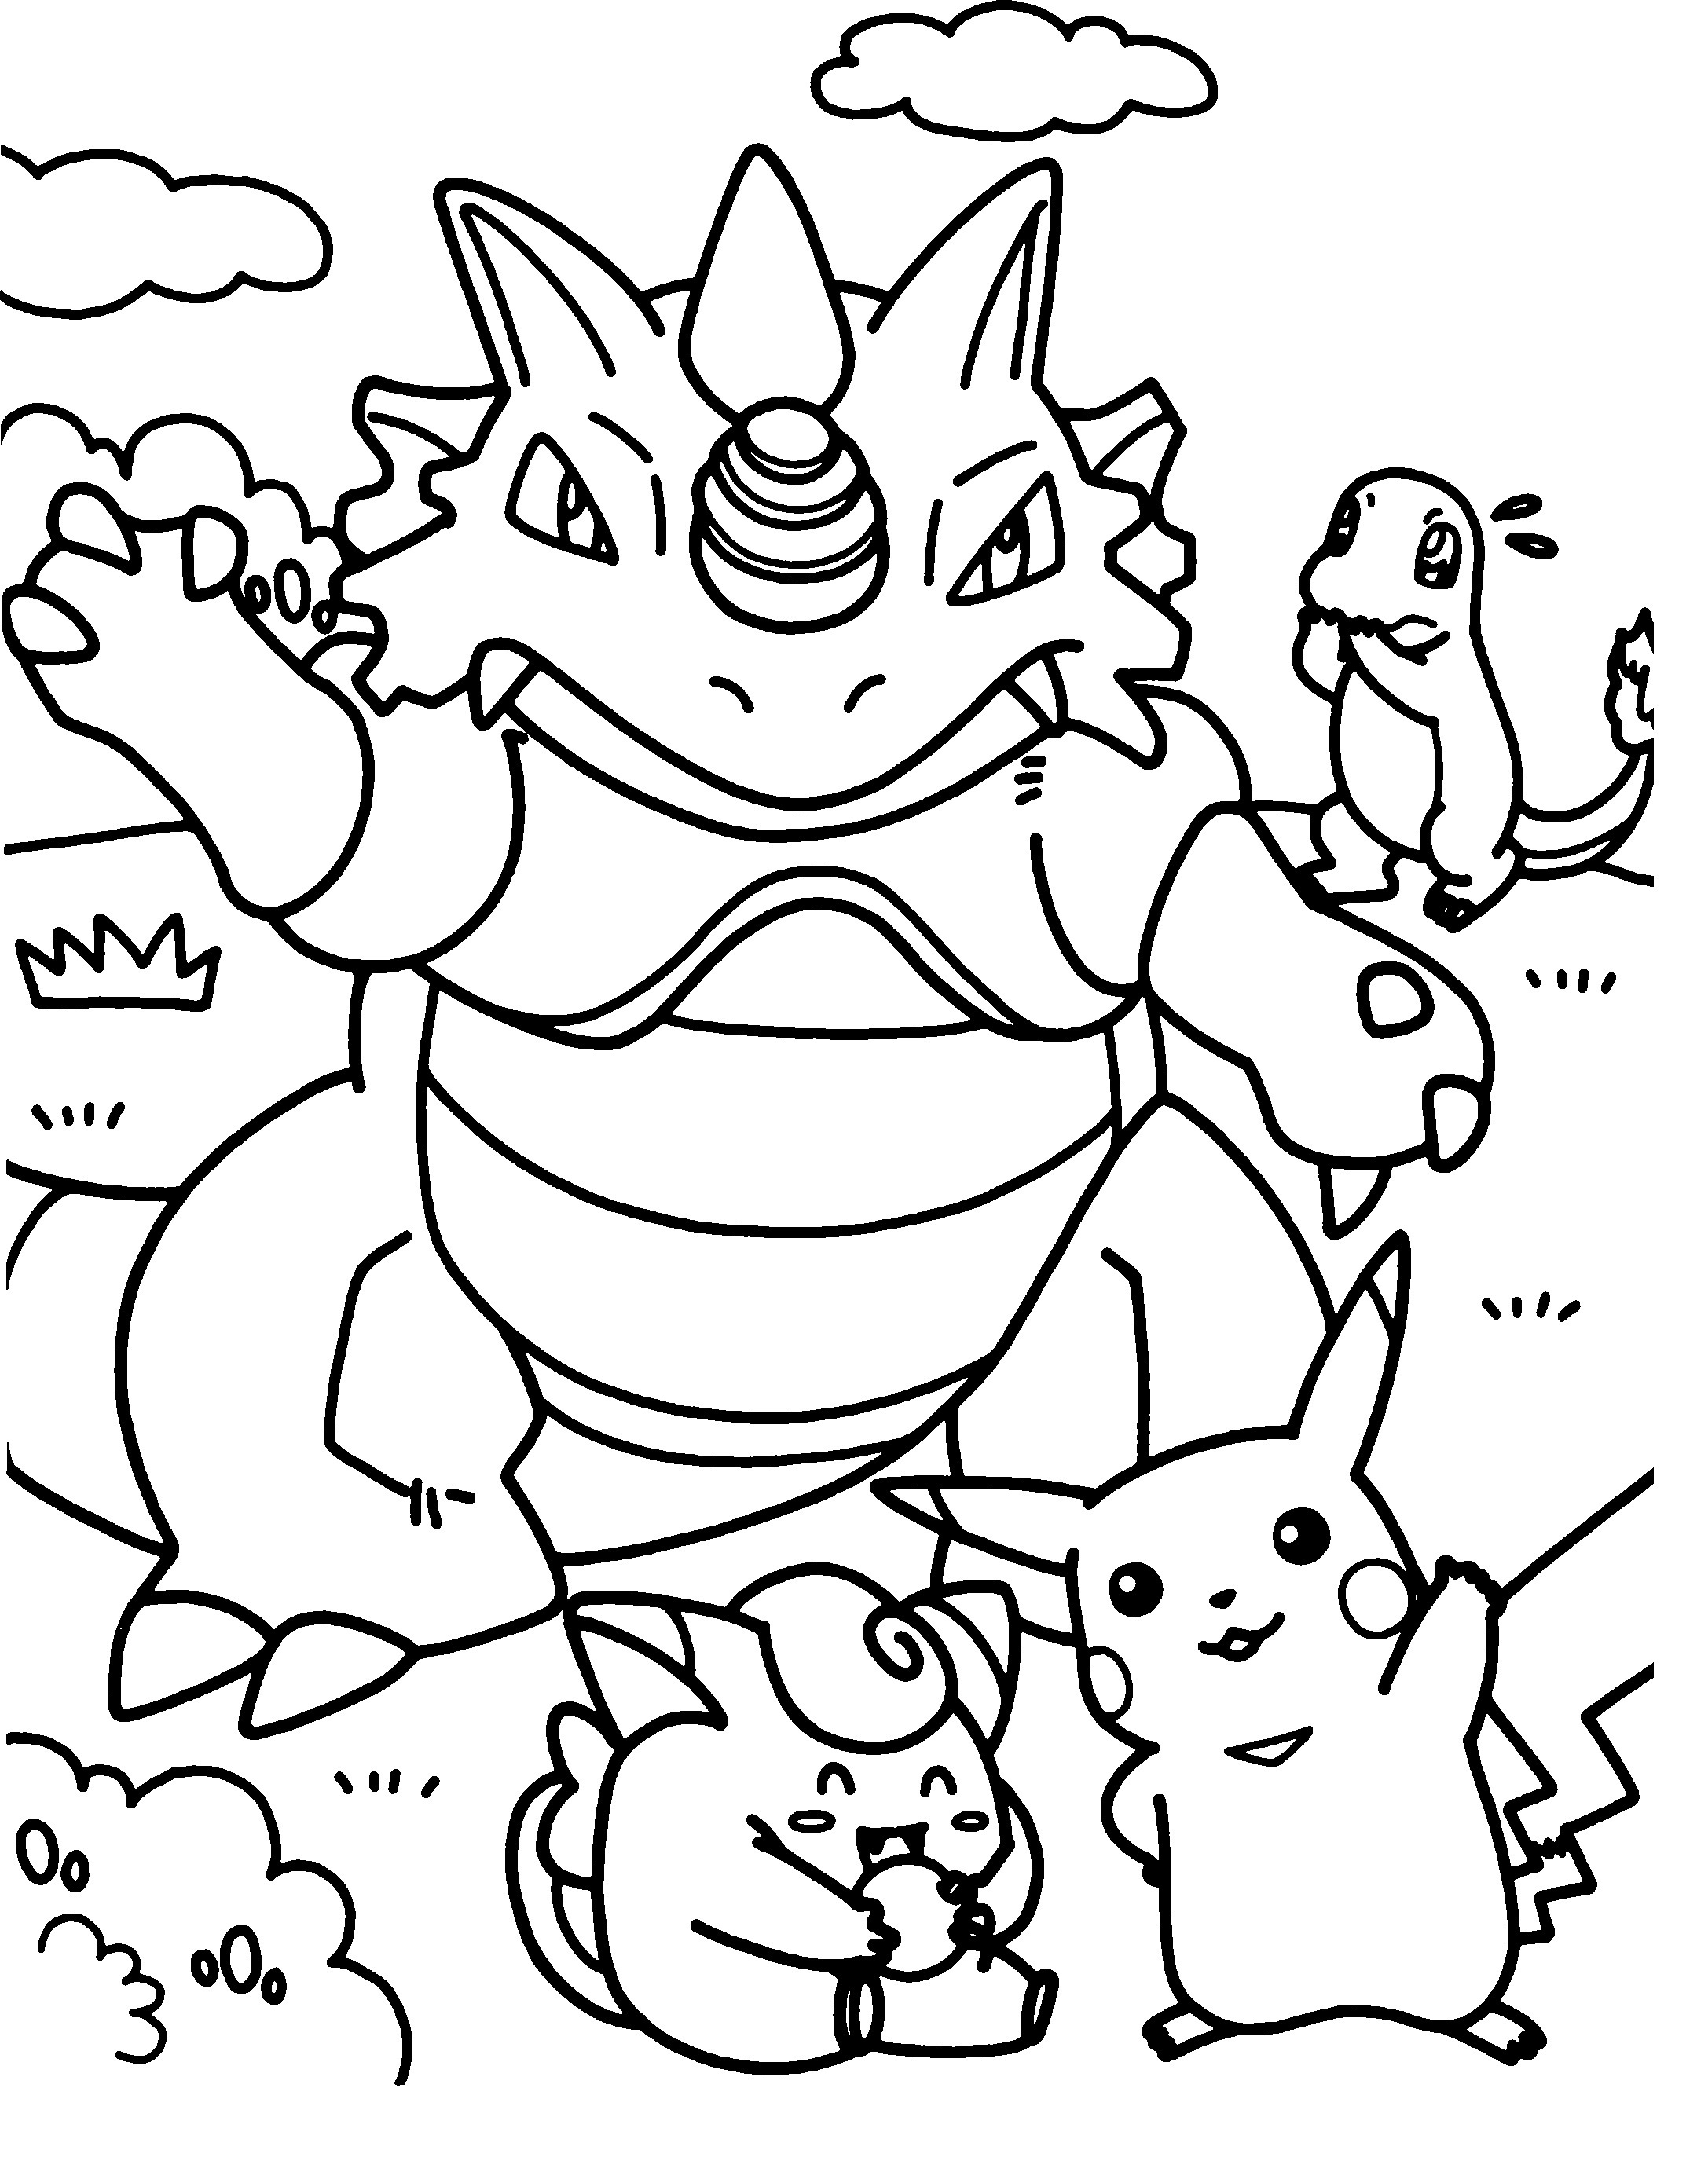 Pokemon Coloring Pages for Kids Printable | ColoringMe.com